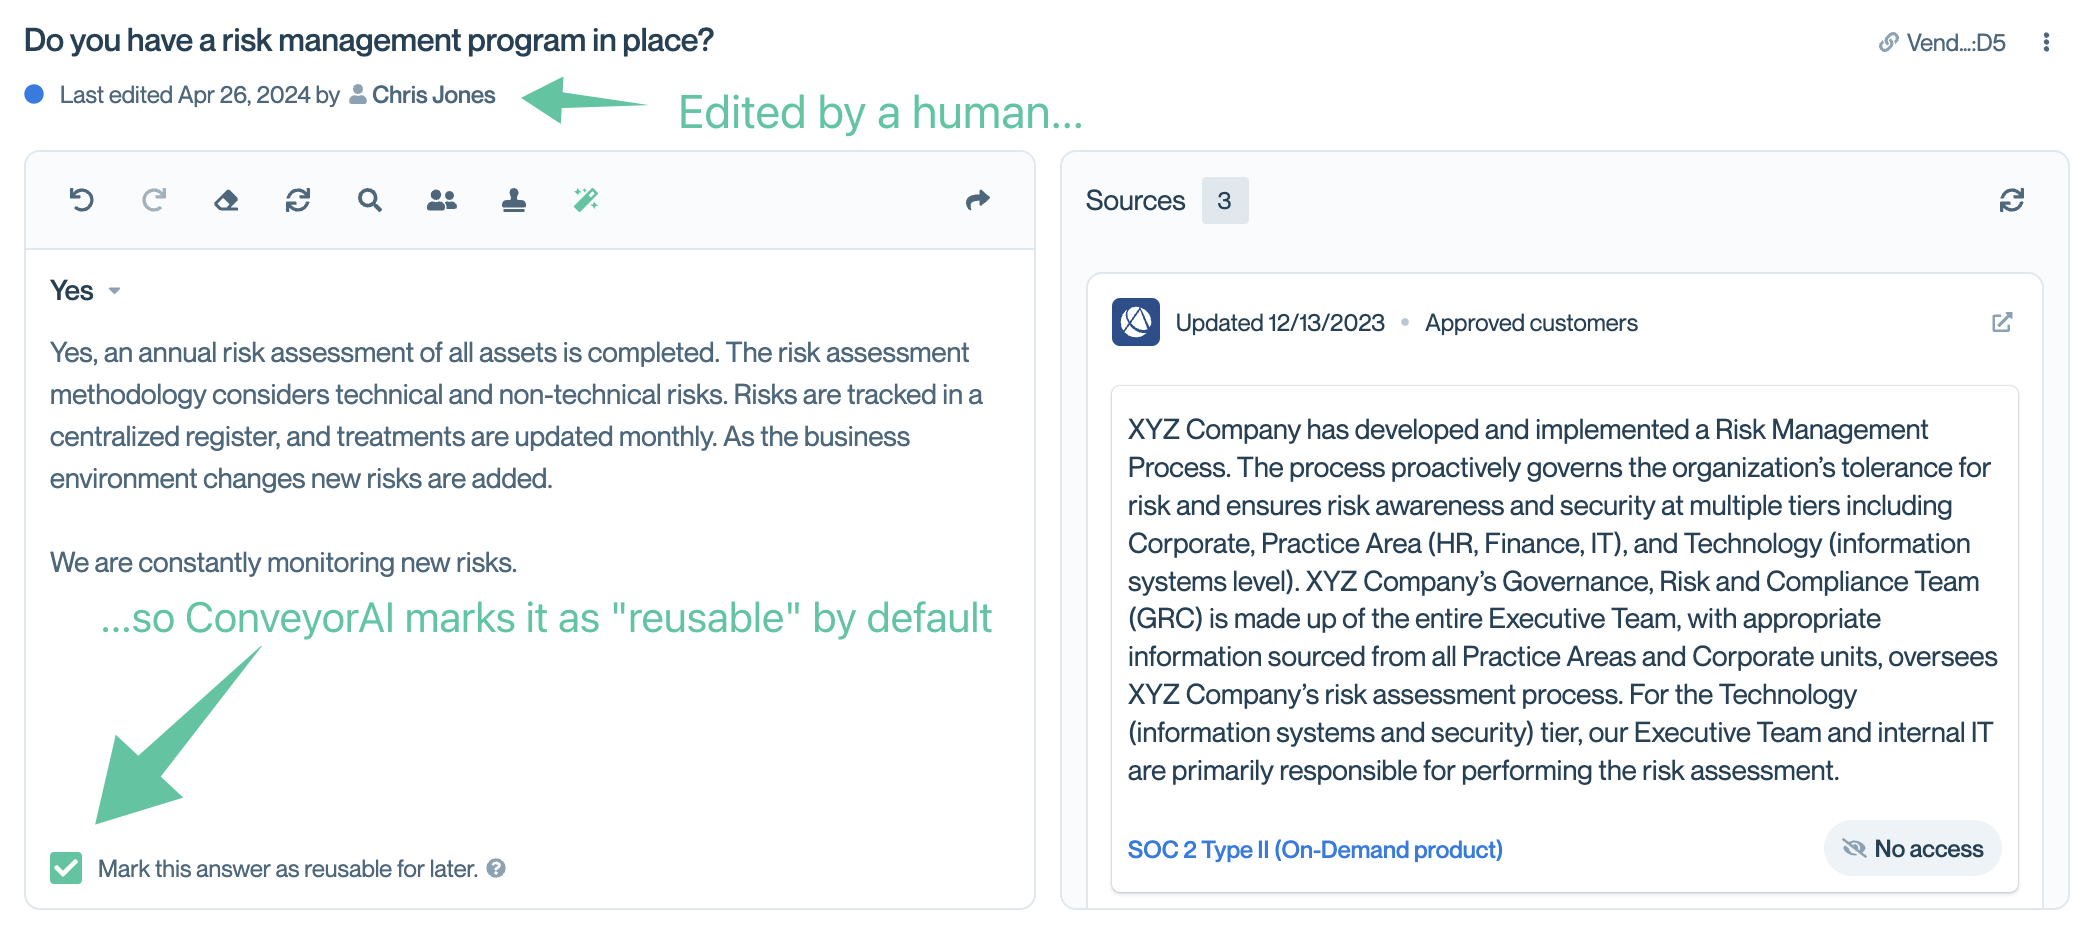 ConveyorAI's automatically marks questions that humans edit "reusable" for future use.